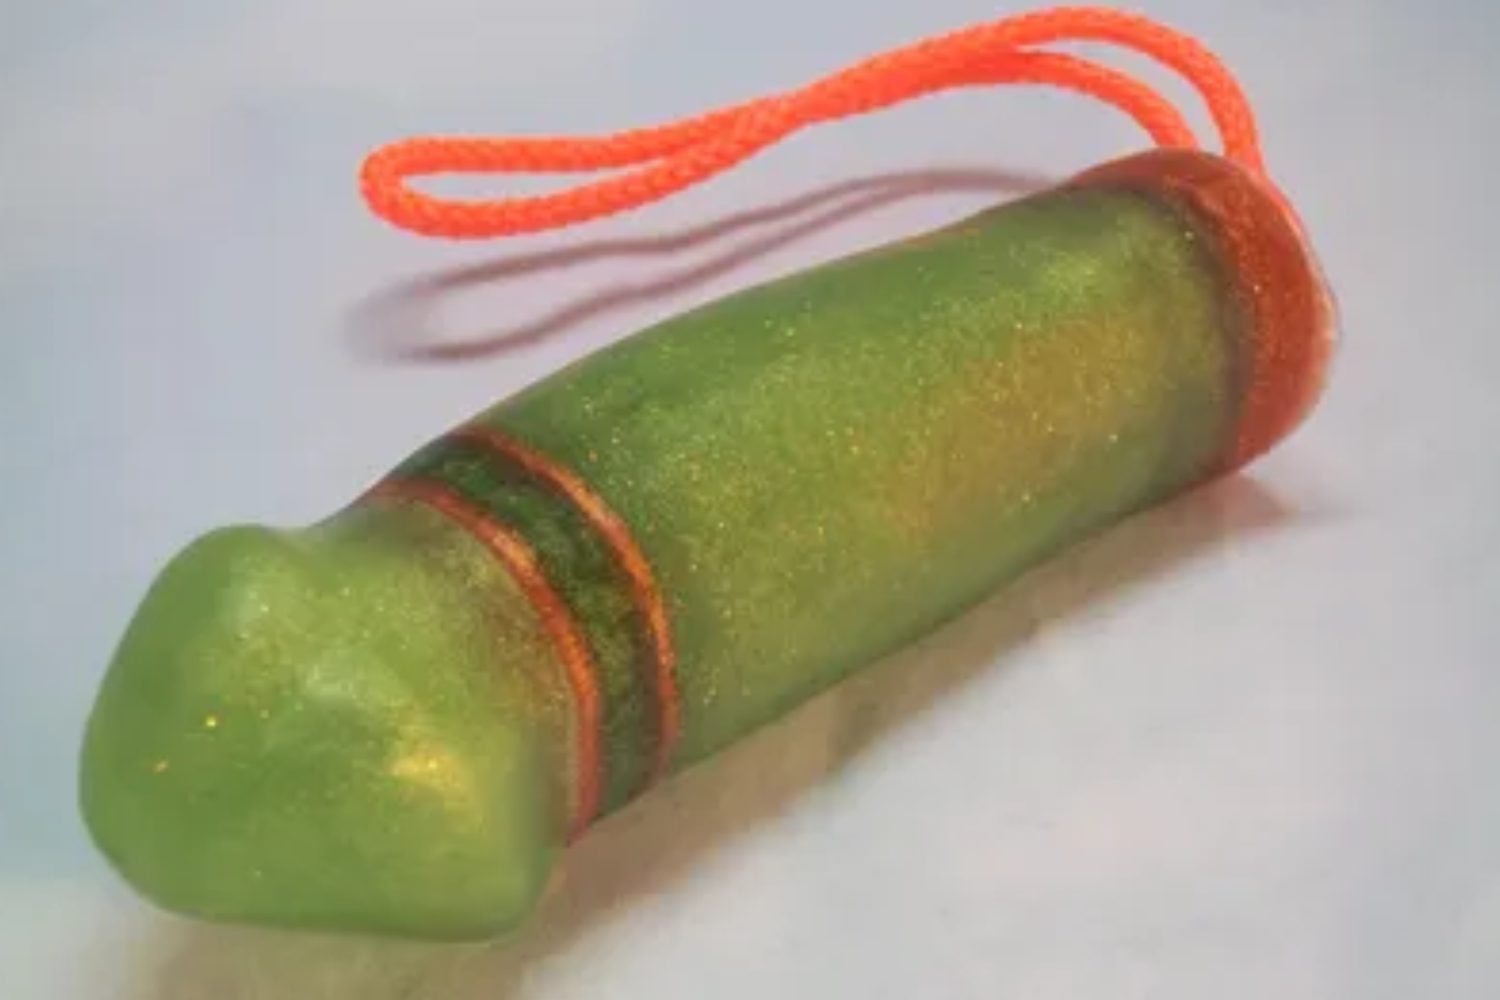 A green toy with orange string hanging from it.